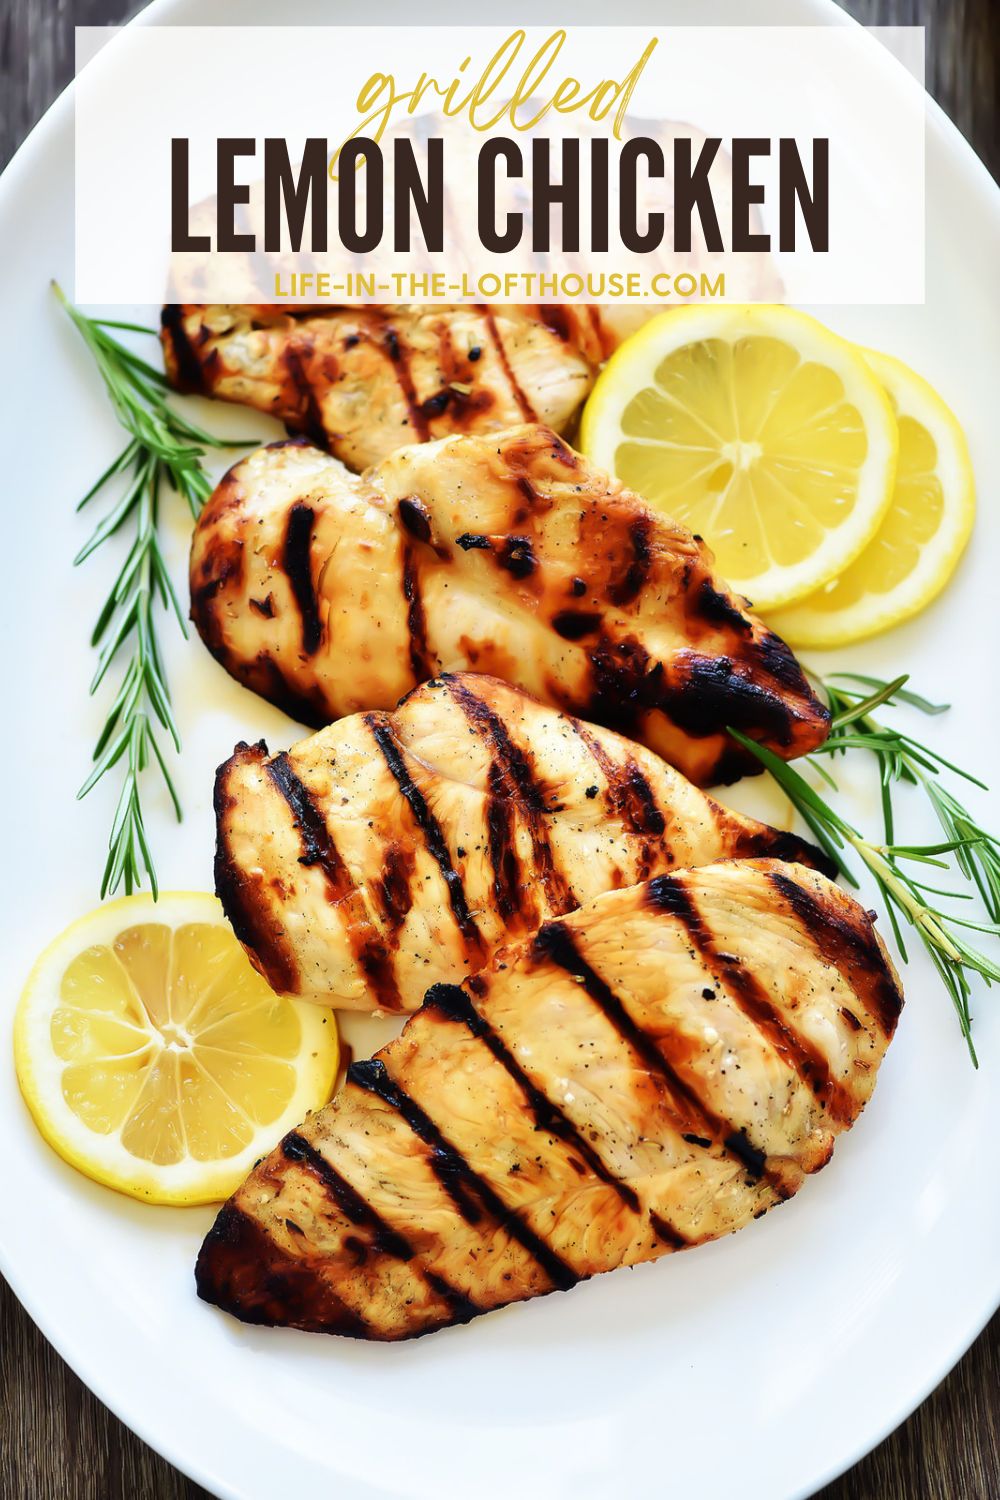 Grilled Lemon Chicken is tender and juicy pieces of chicken breasts that are packed with lemon flavor. Life-in-the-Lofthouse.com